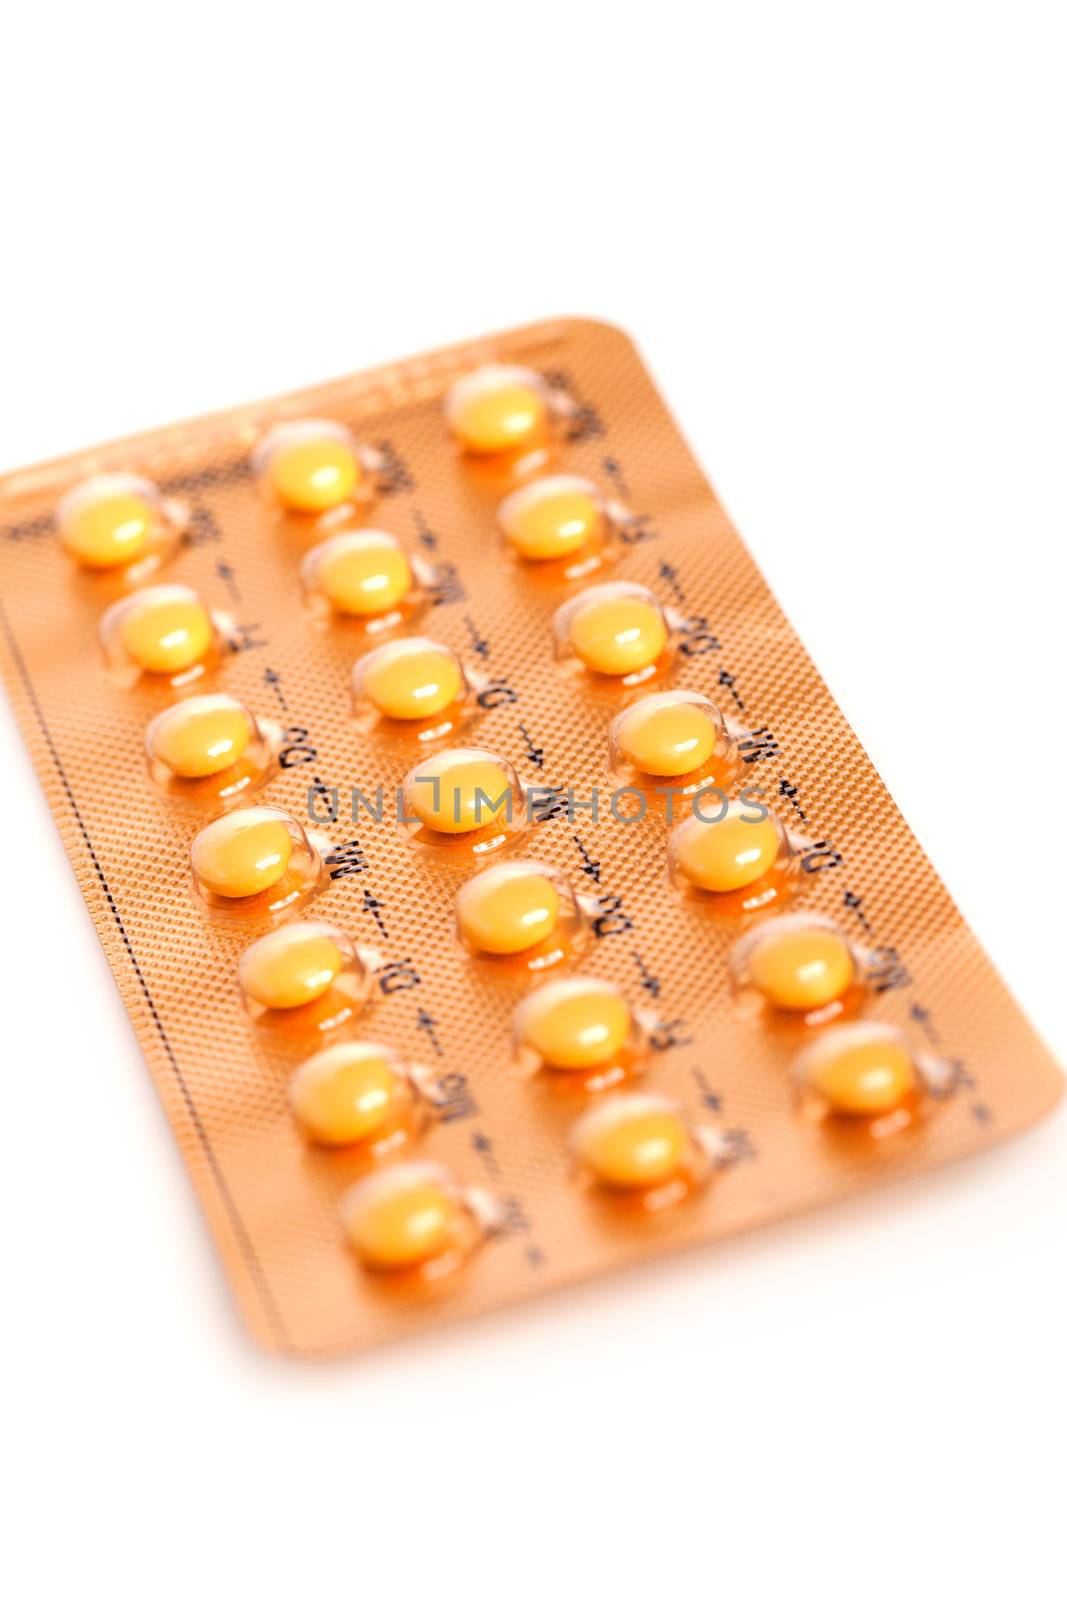 tablets (Birth Control Pills) on a white background